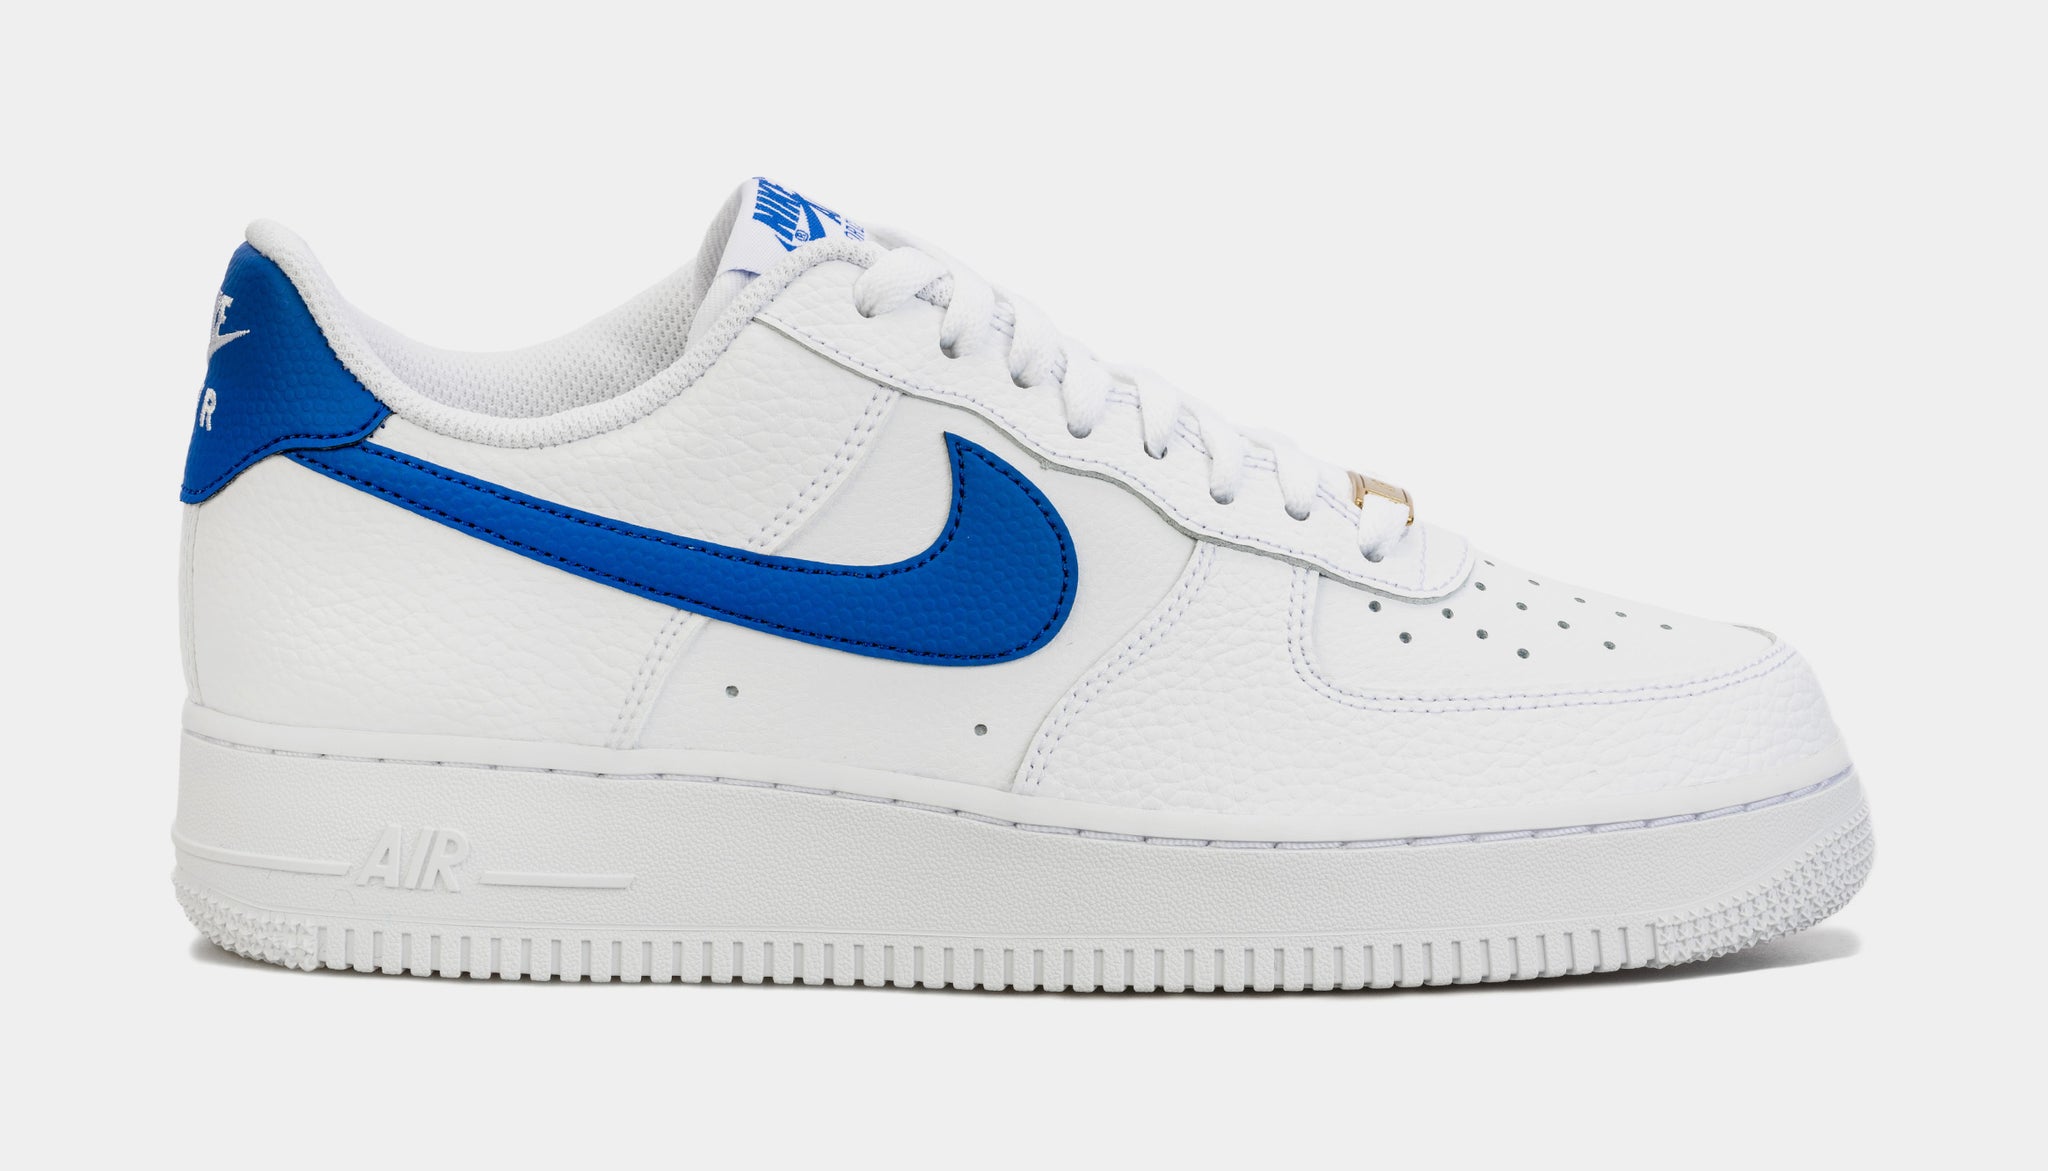 Nike Air Force 1 Low Mens Lifestyle Shoes White Blue Shoe Palace